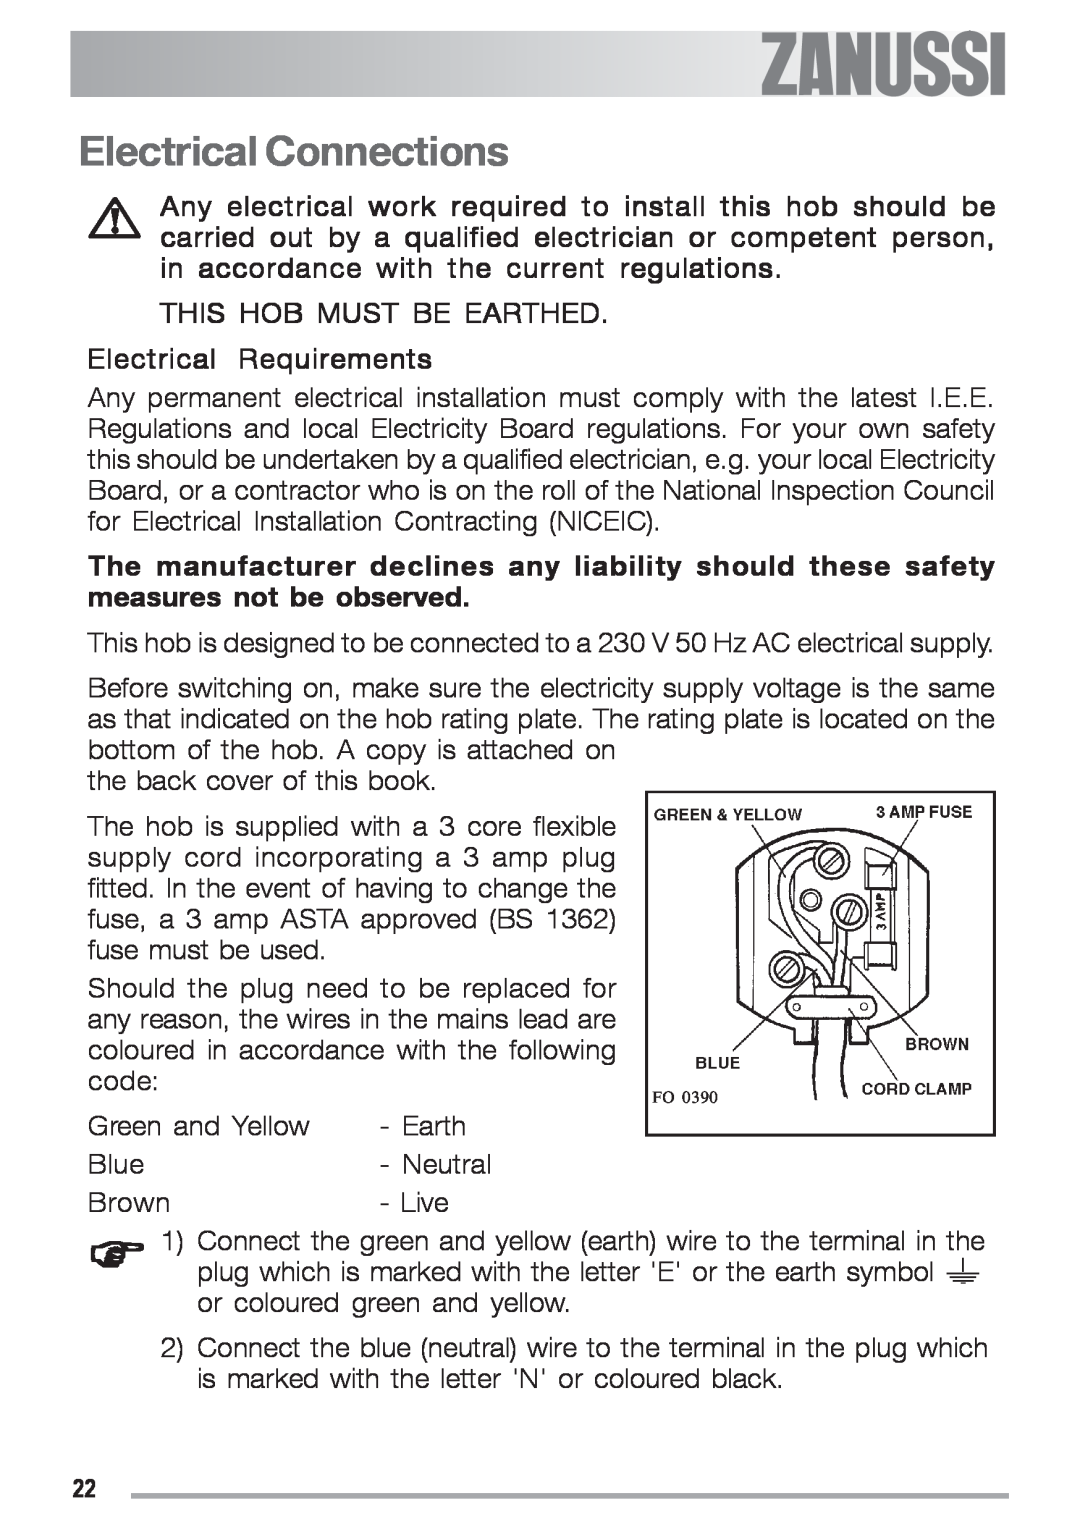 Zanussi ZGS 682 ICT manual Electrical Connections 